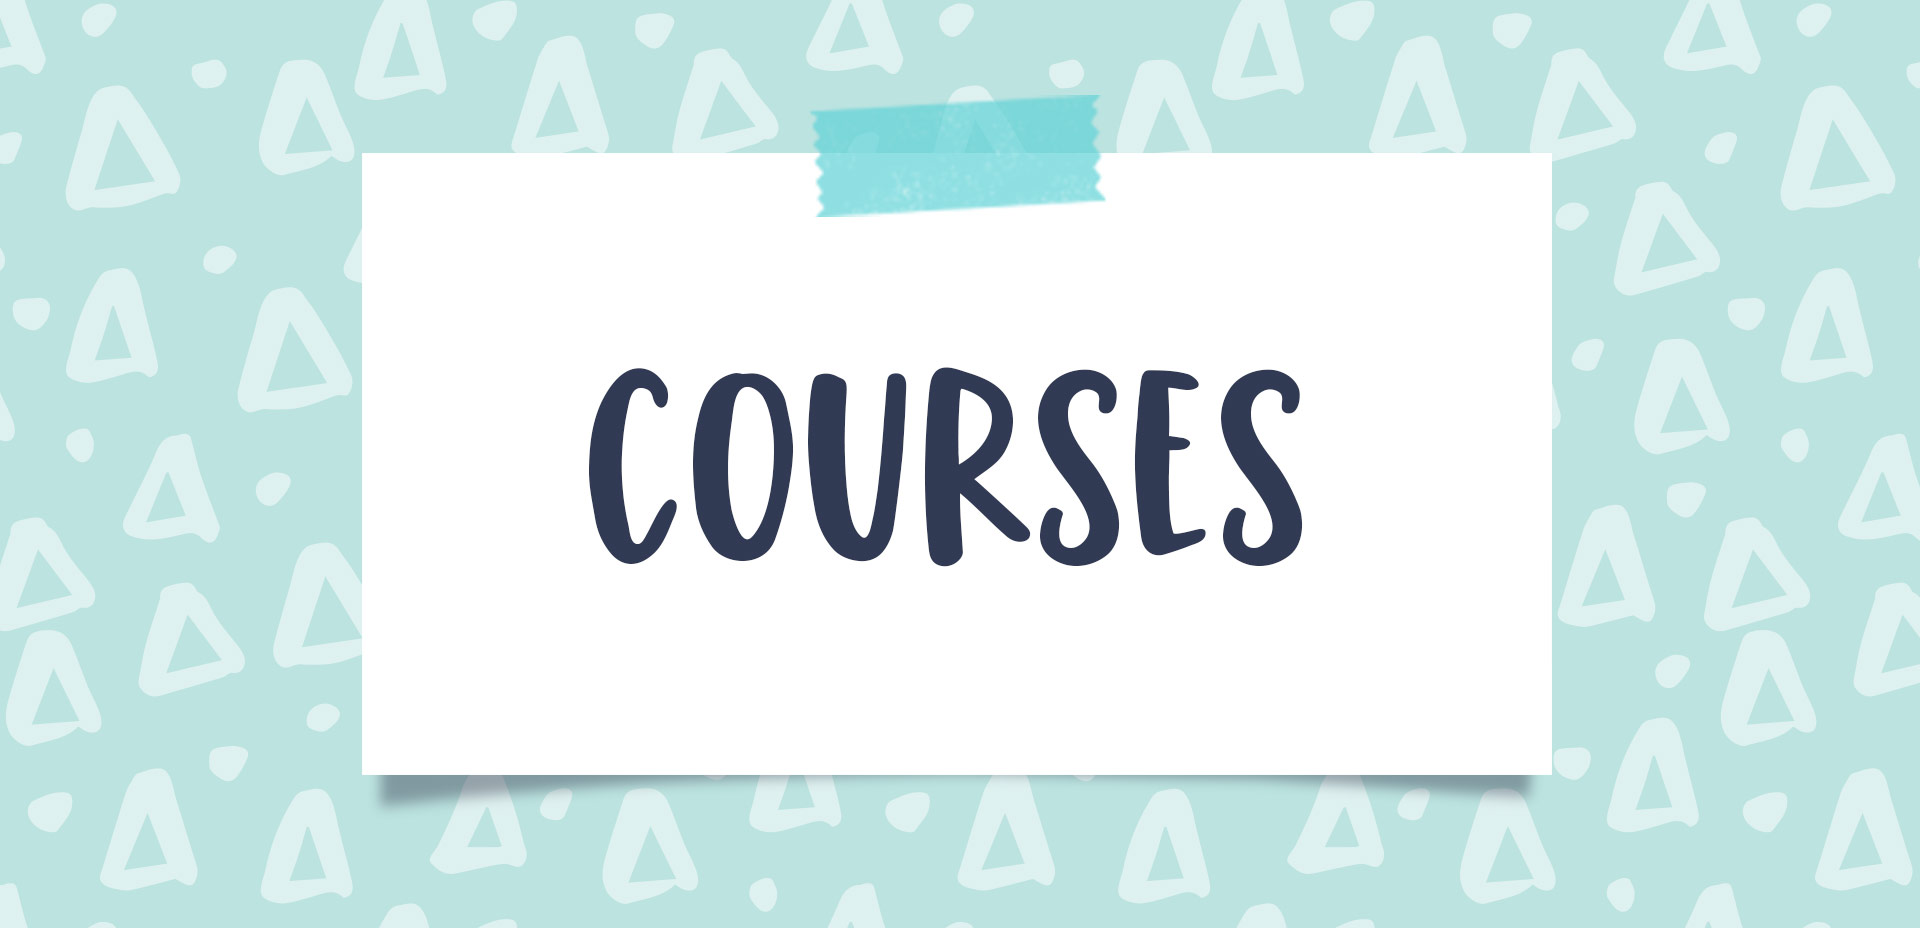 2 Ways You Can Use courses To Become Irresistible To Customers